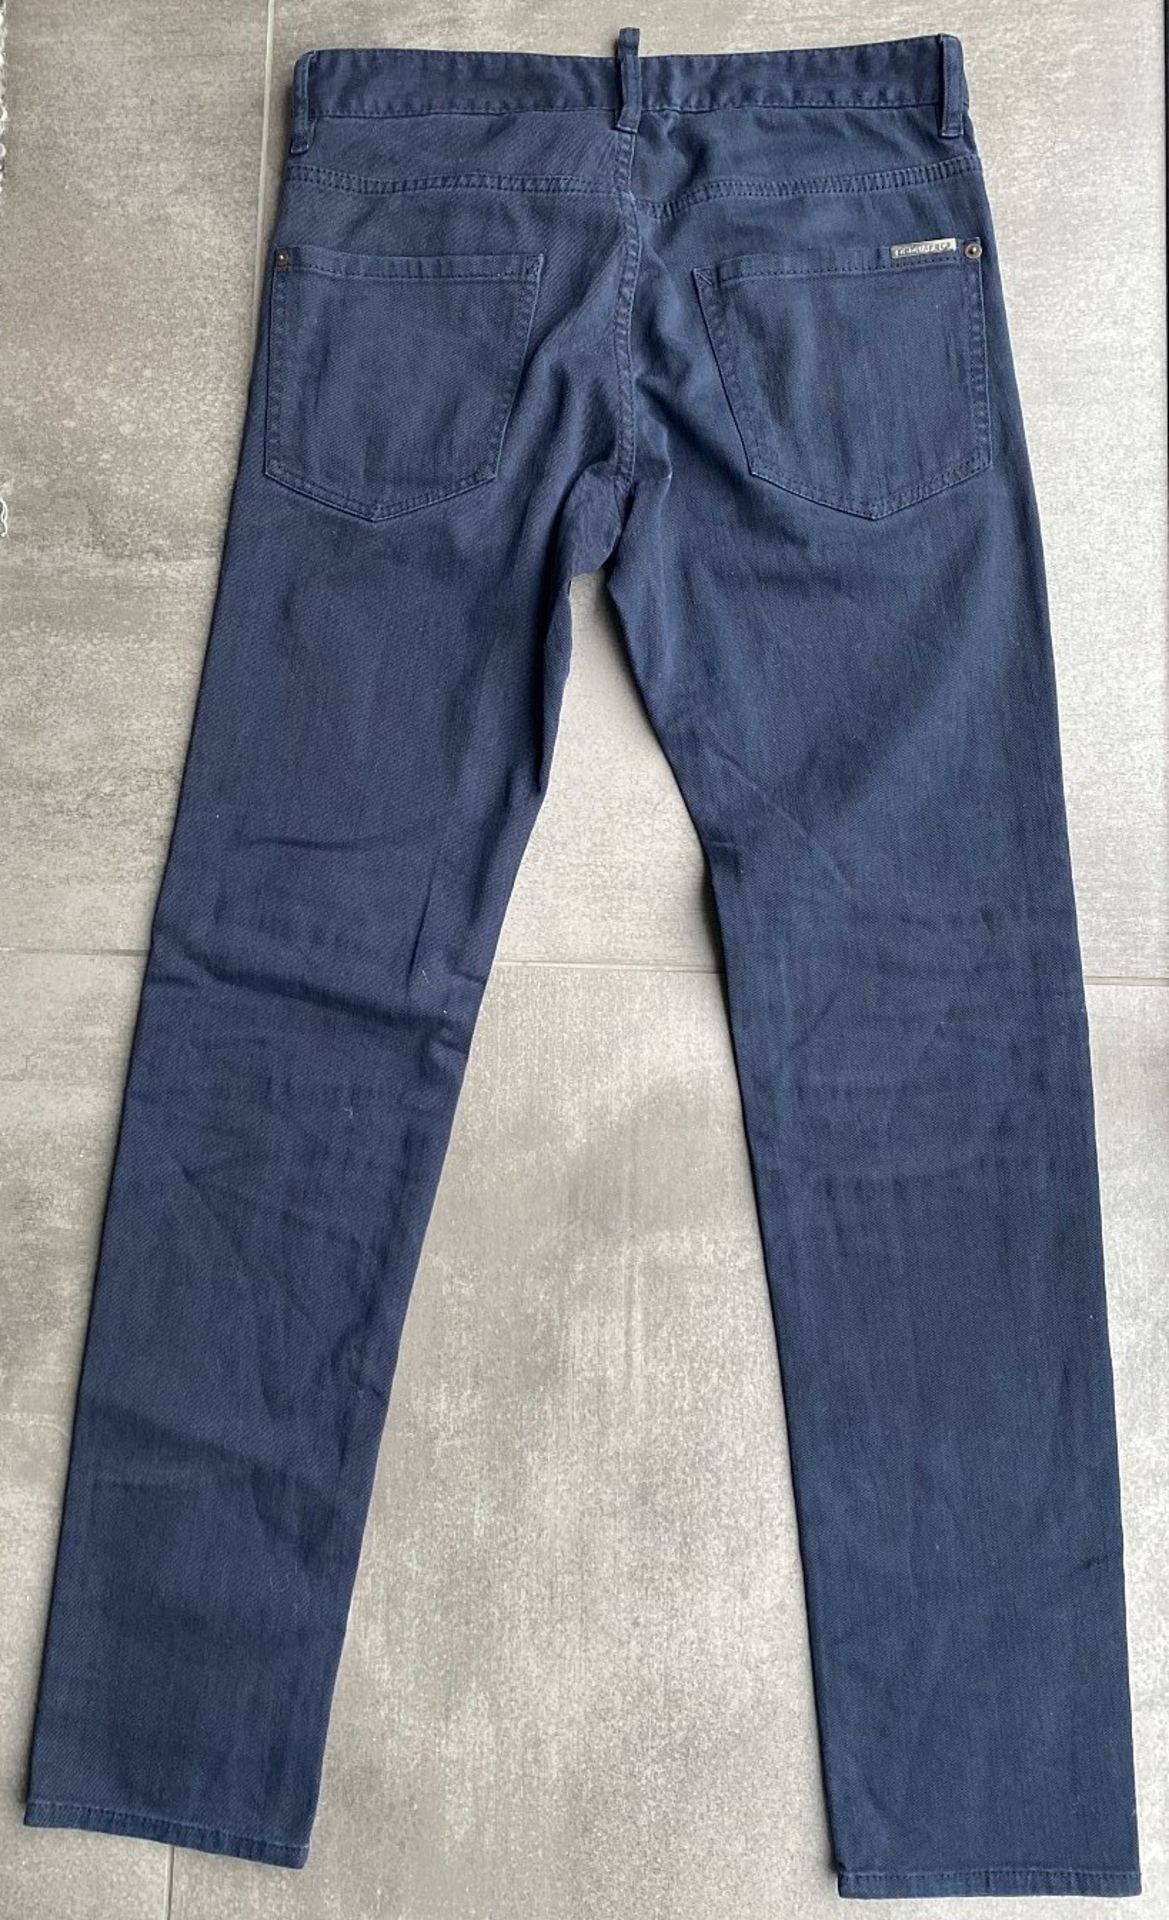 1 x Pair Of Men's Genuine Dsquared2 Designer Jeans In Navy - Waist Size: UK 30 / ITALY 46 - Preowned - Image 6 of 7